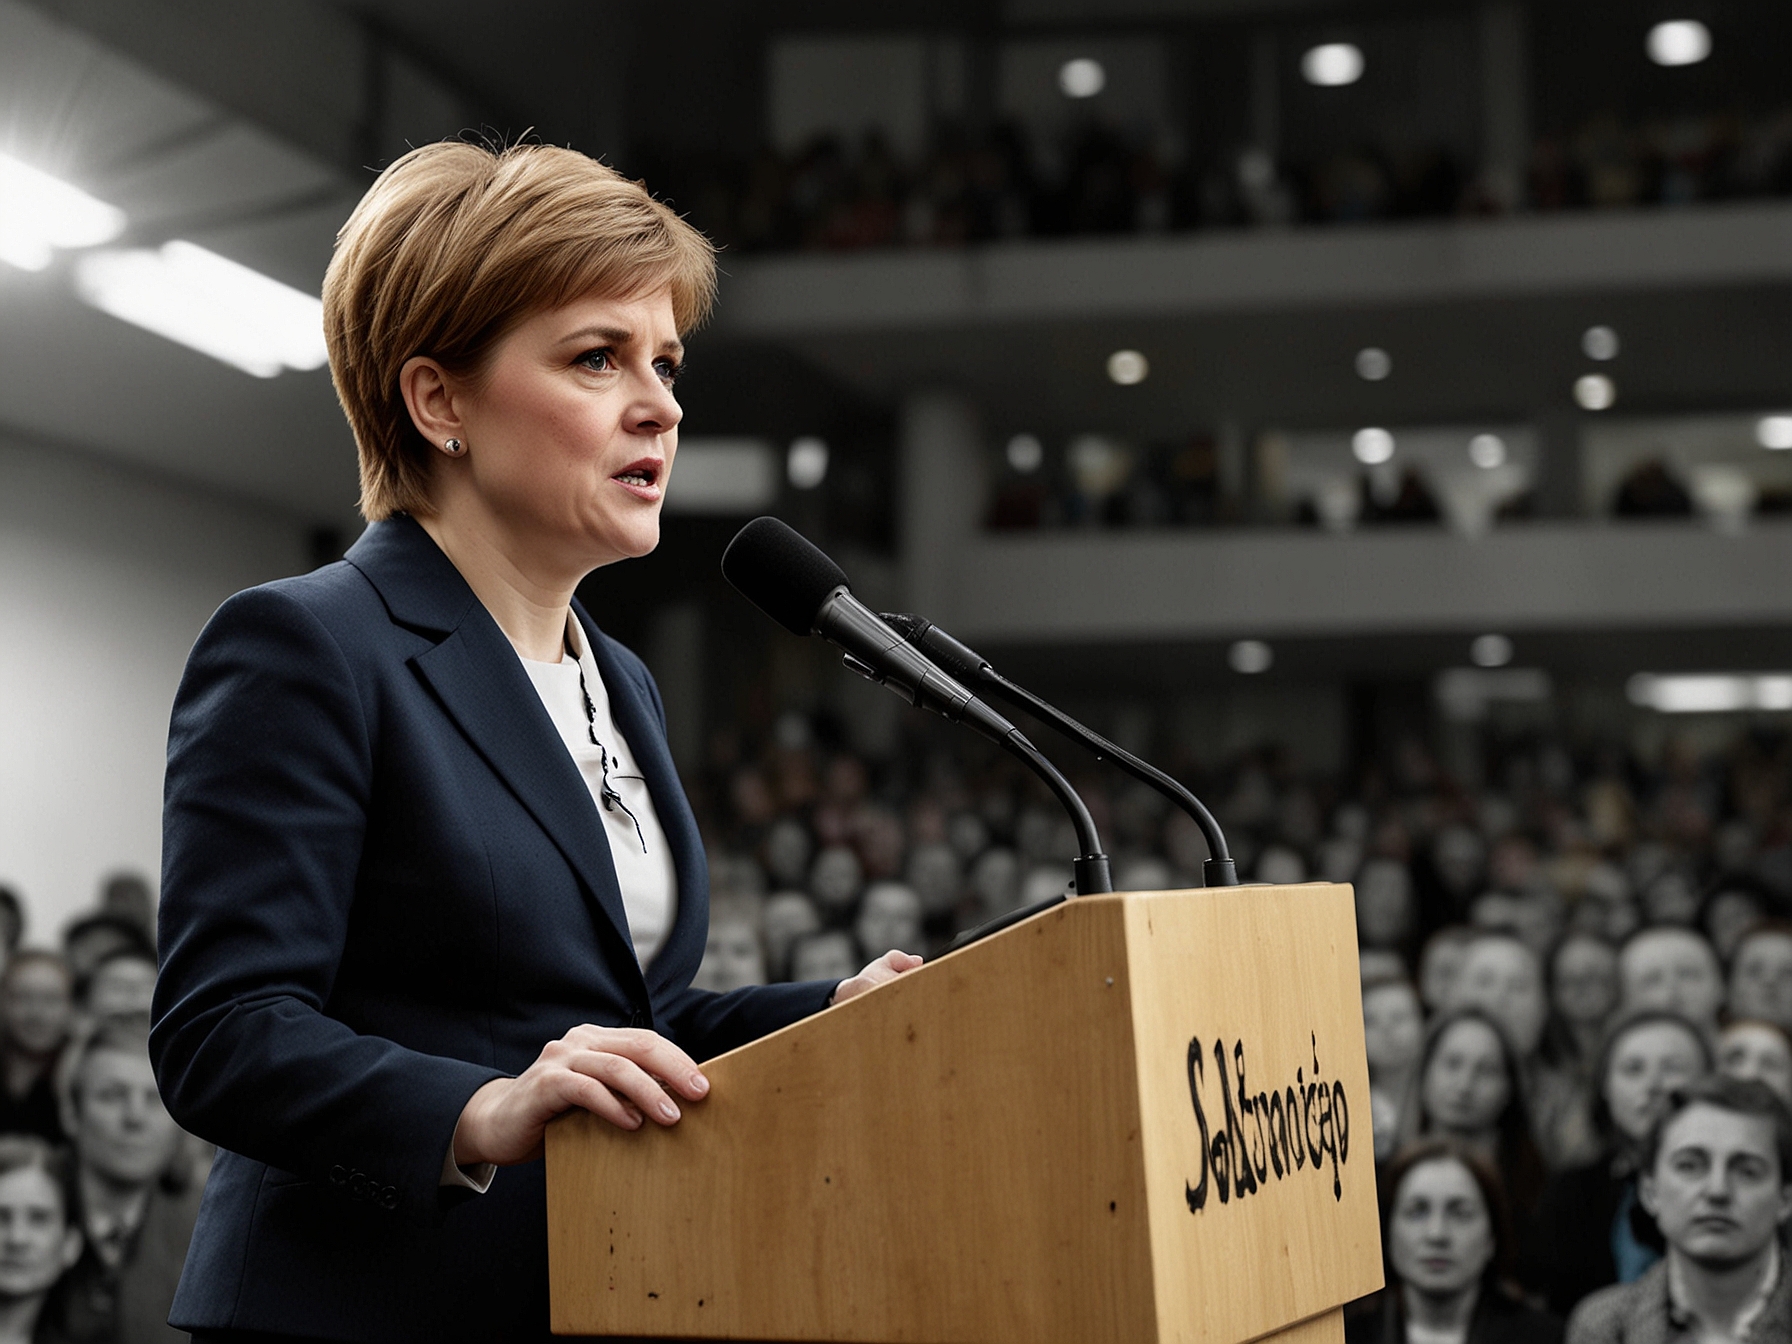 Nicola Sturgeon speaks at a public event, emphasizing the importance of flexible election scheduling to ensure democratic participation for all eligible voters.